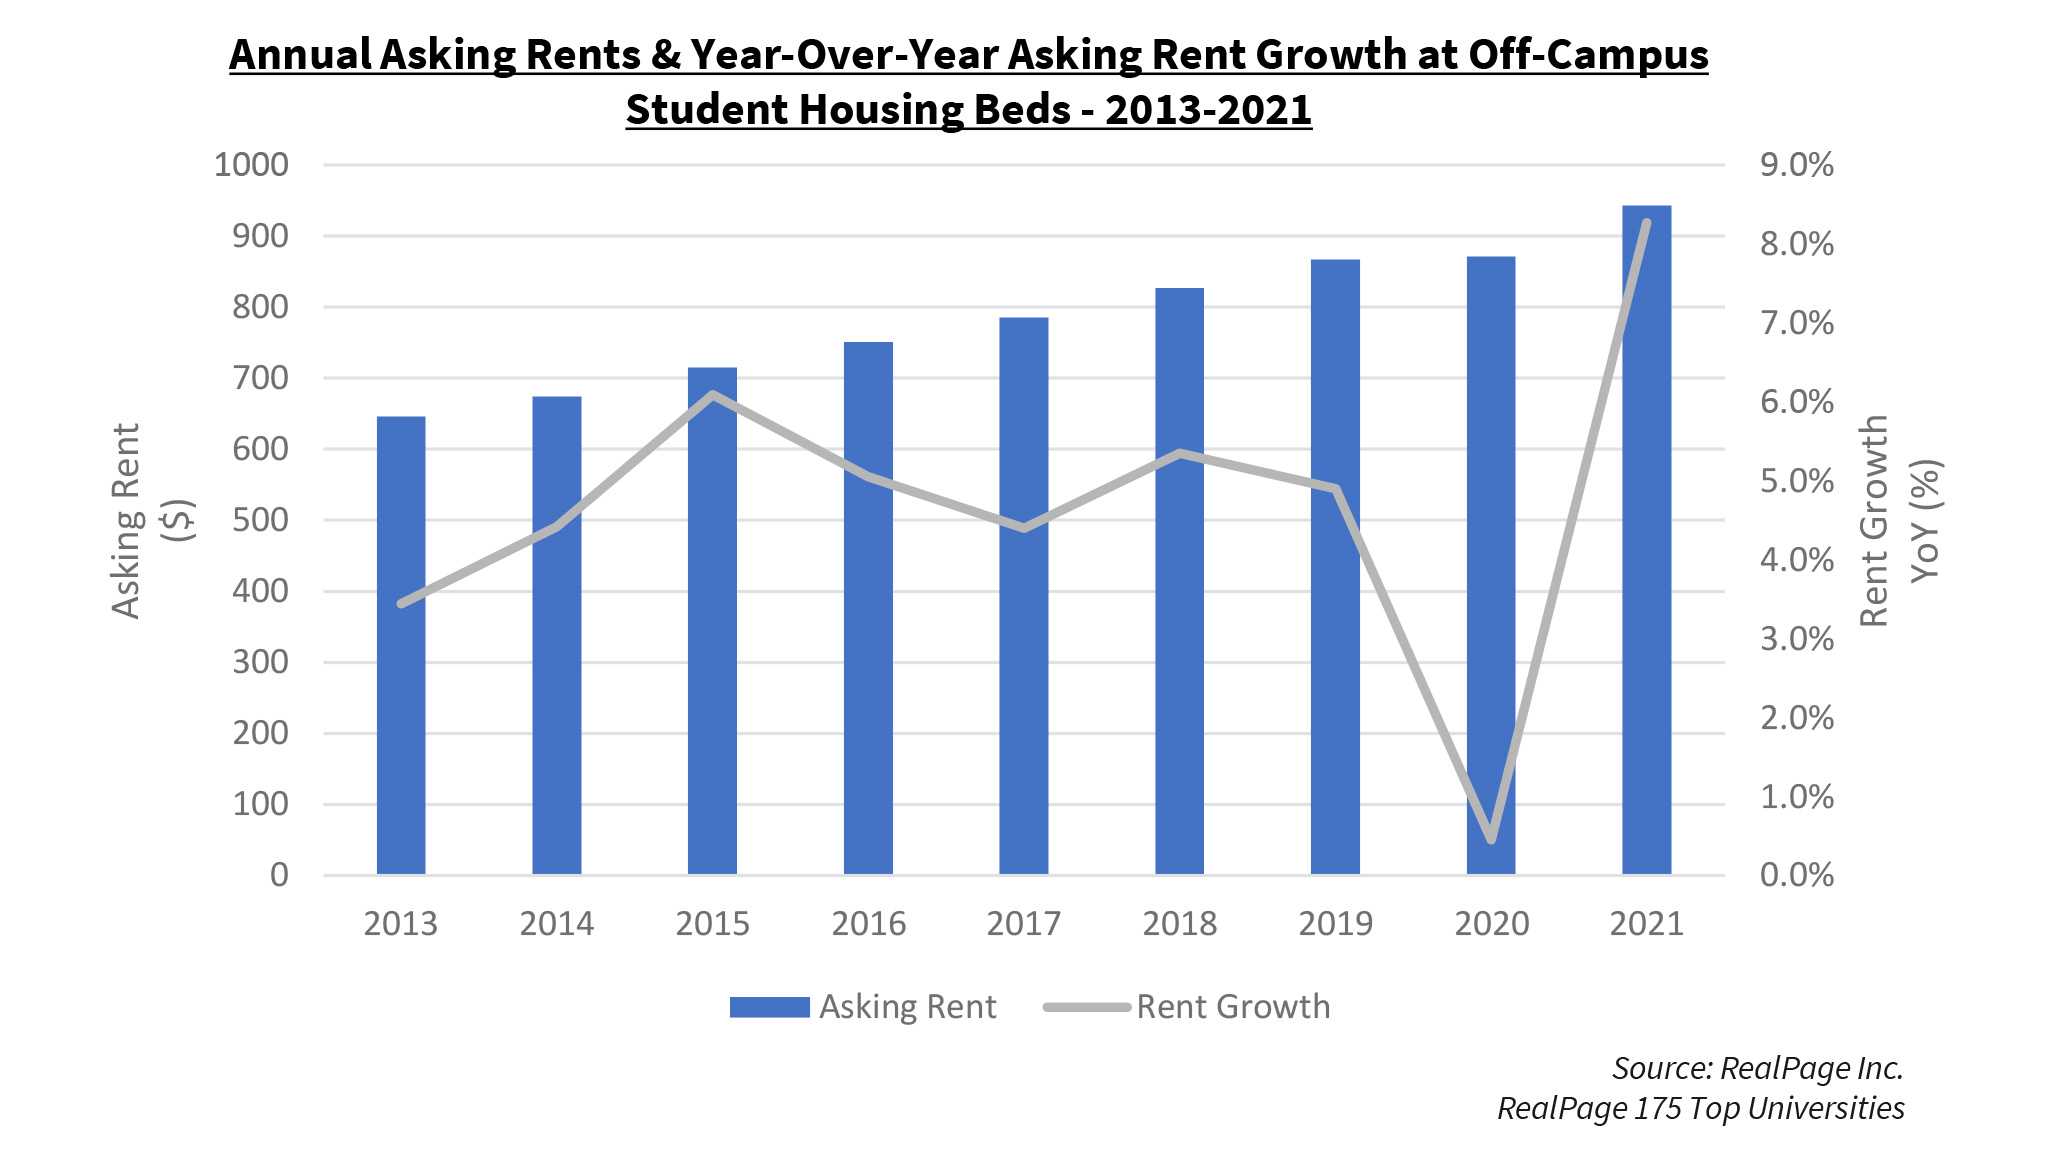 Annual Asking Rents & Year-Over-Year Asking Rent Growth at Off-Campus Student Housing Beds - 2013-2021